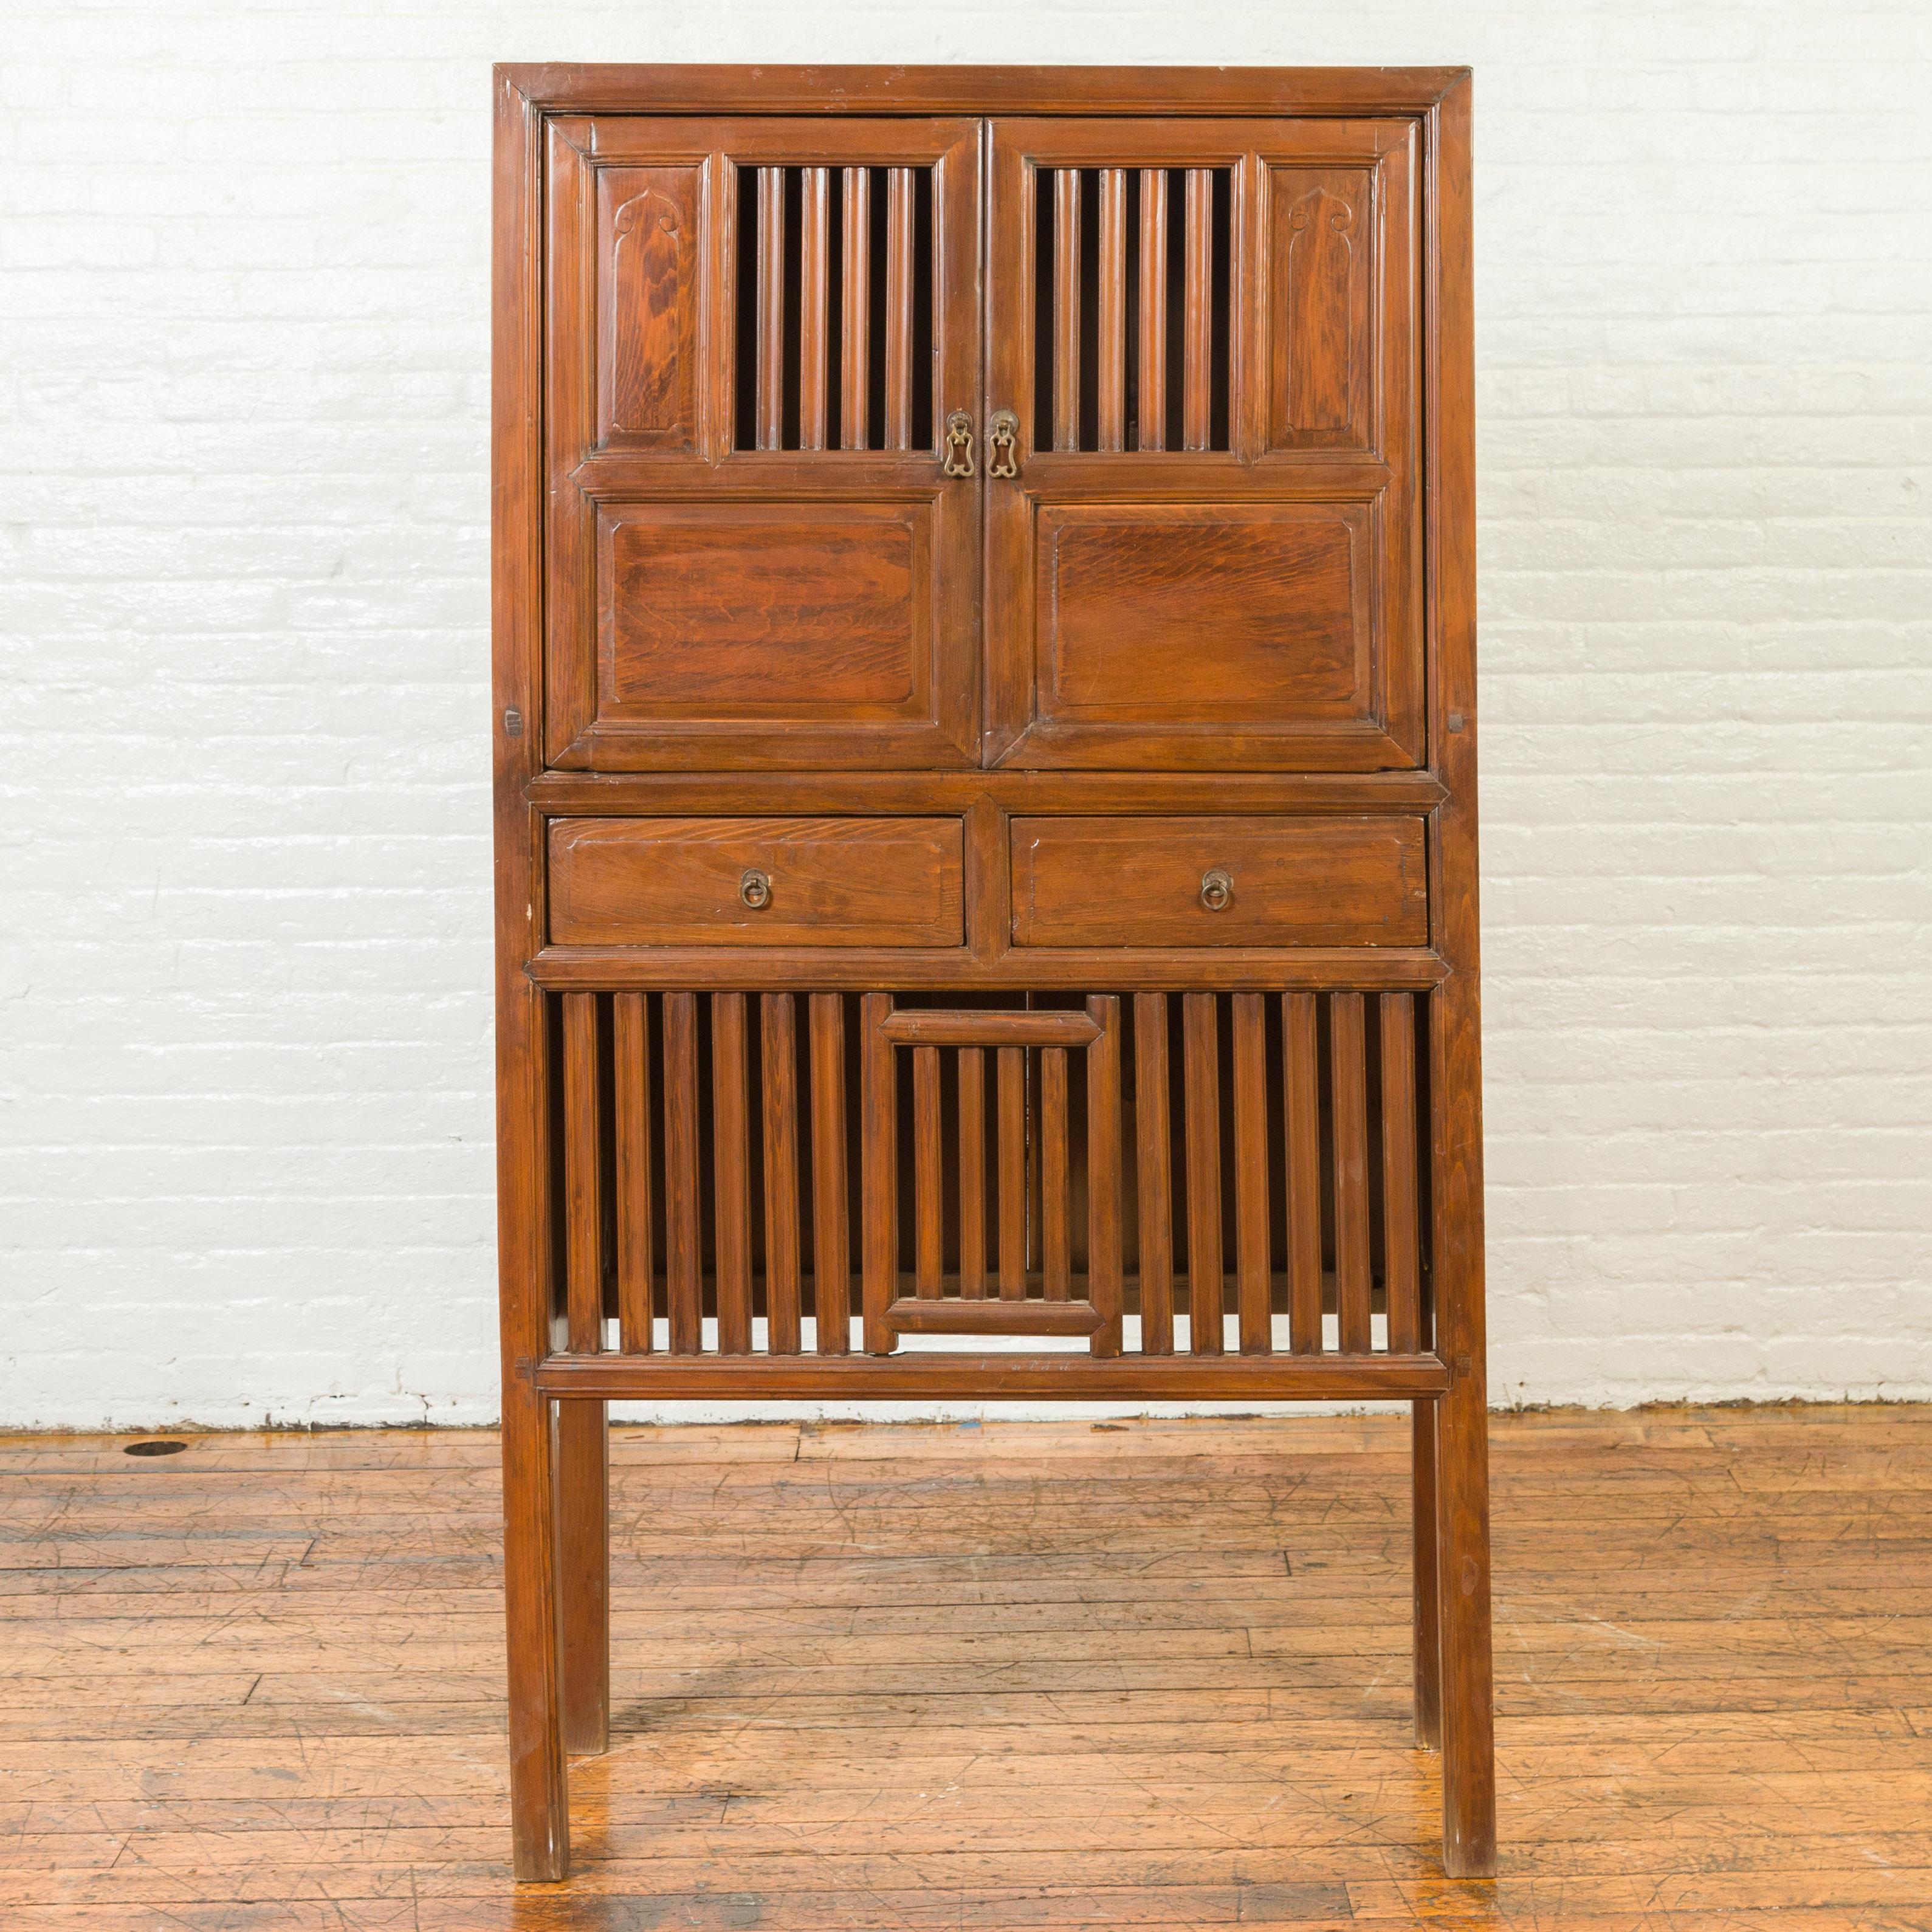 A Chinese vintage cabinet from the mid-20th century, with fretwork design, doors, drawers and tall legs. Created in China during the midcentury period, this wooden cabinet features a linear silhouette accented by perfectly organized fretwork